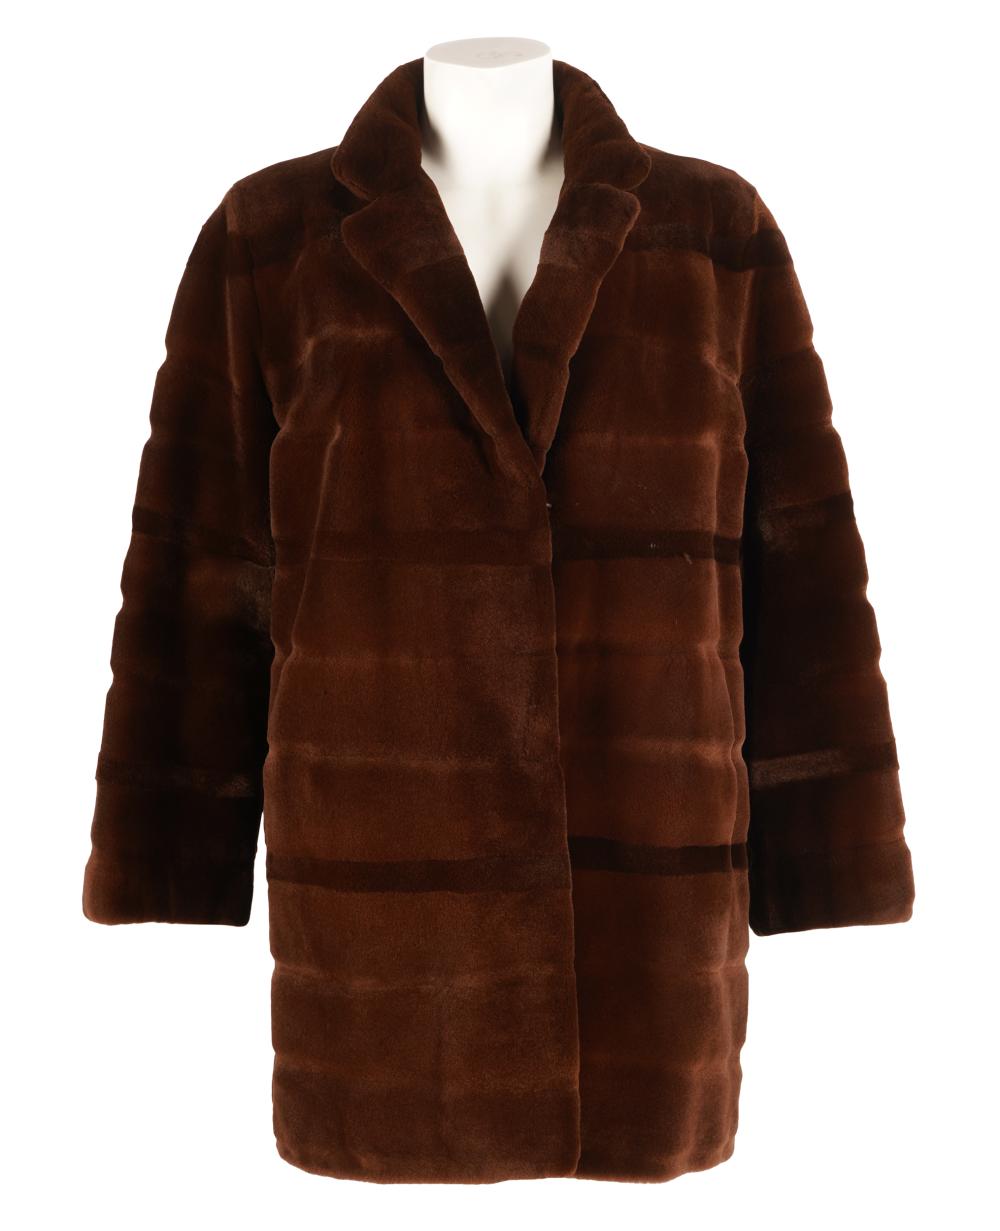 BROWN SHEARED FUR JACKETwith label  3319a1